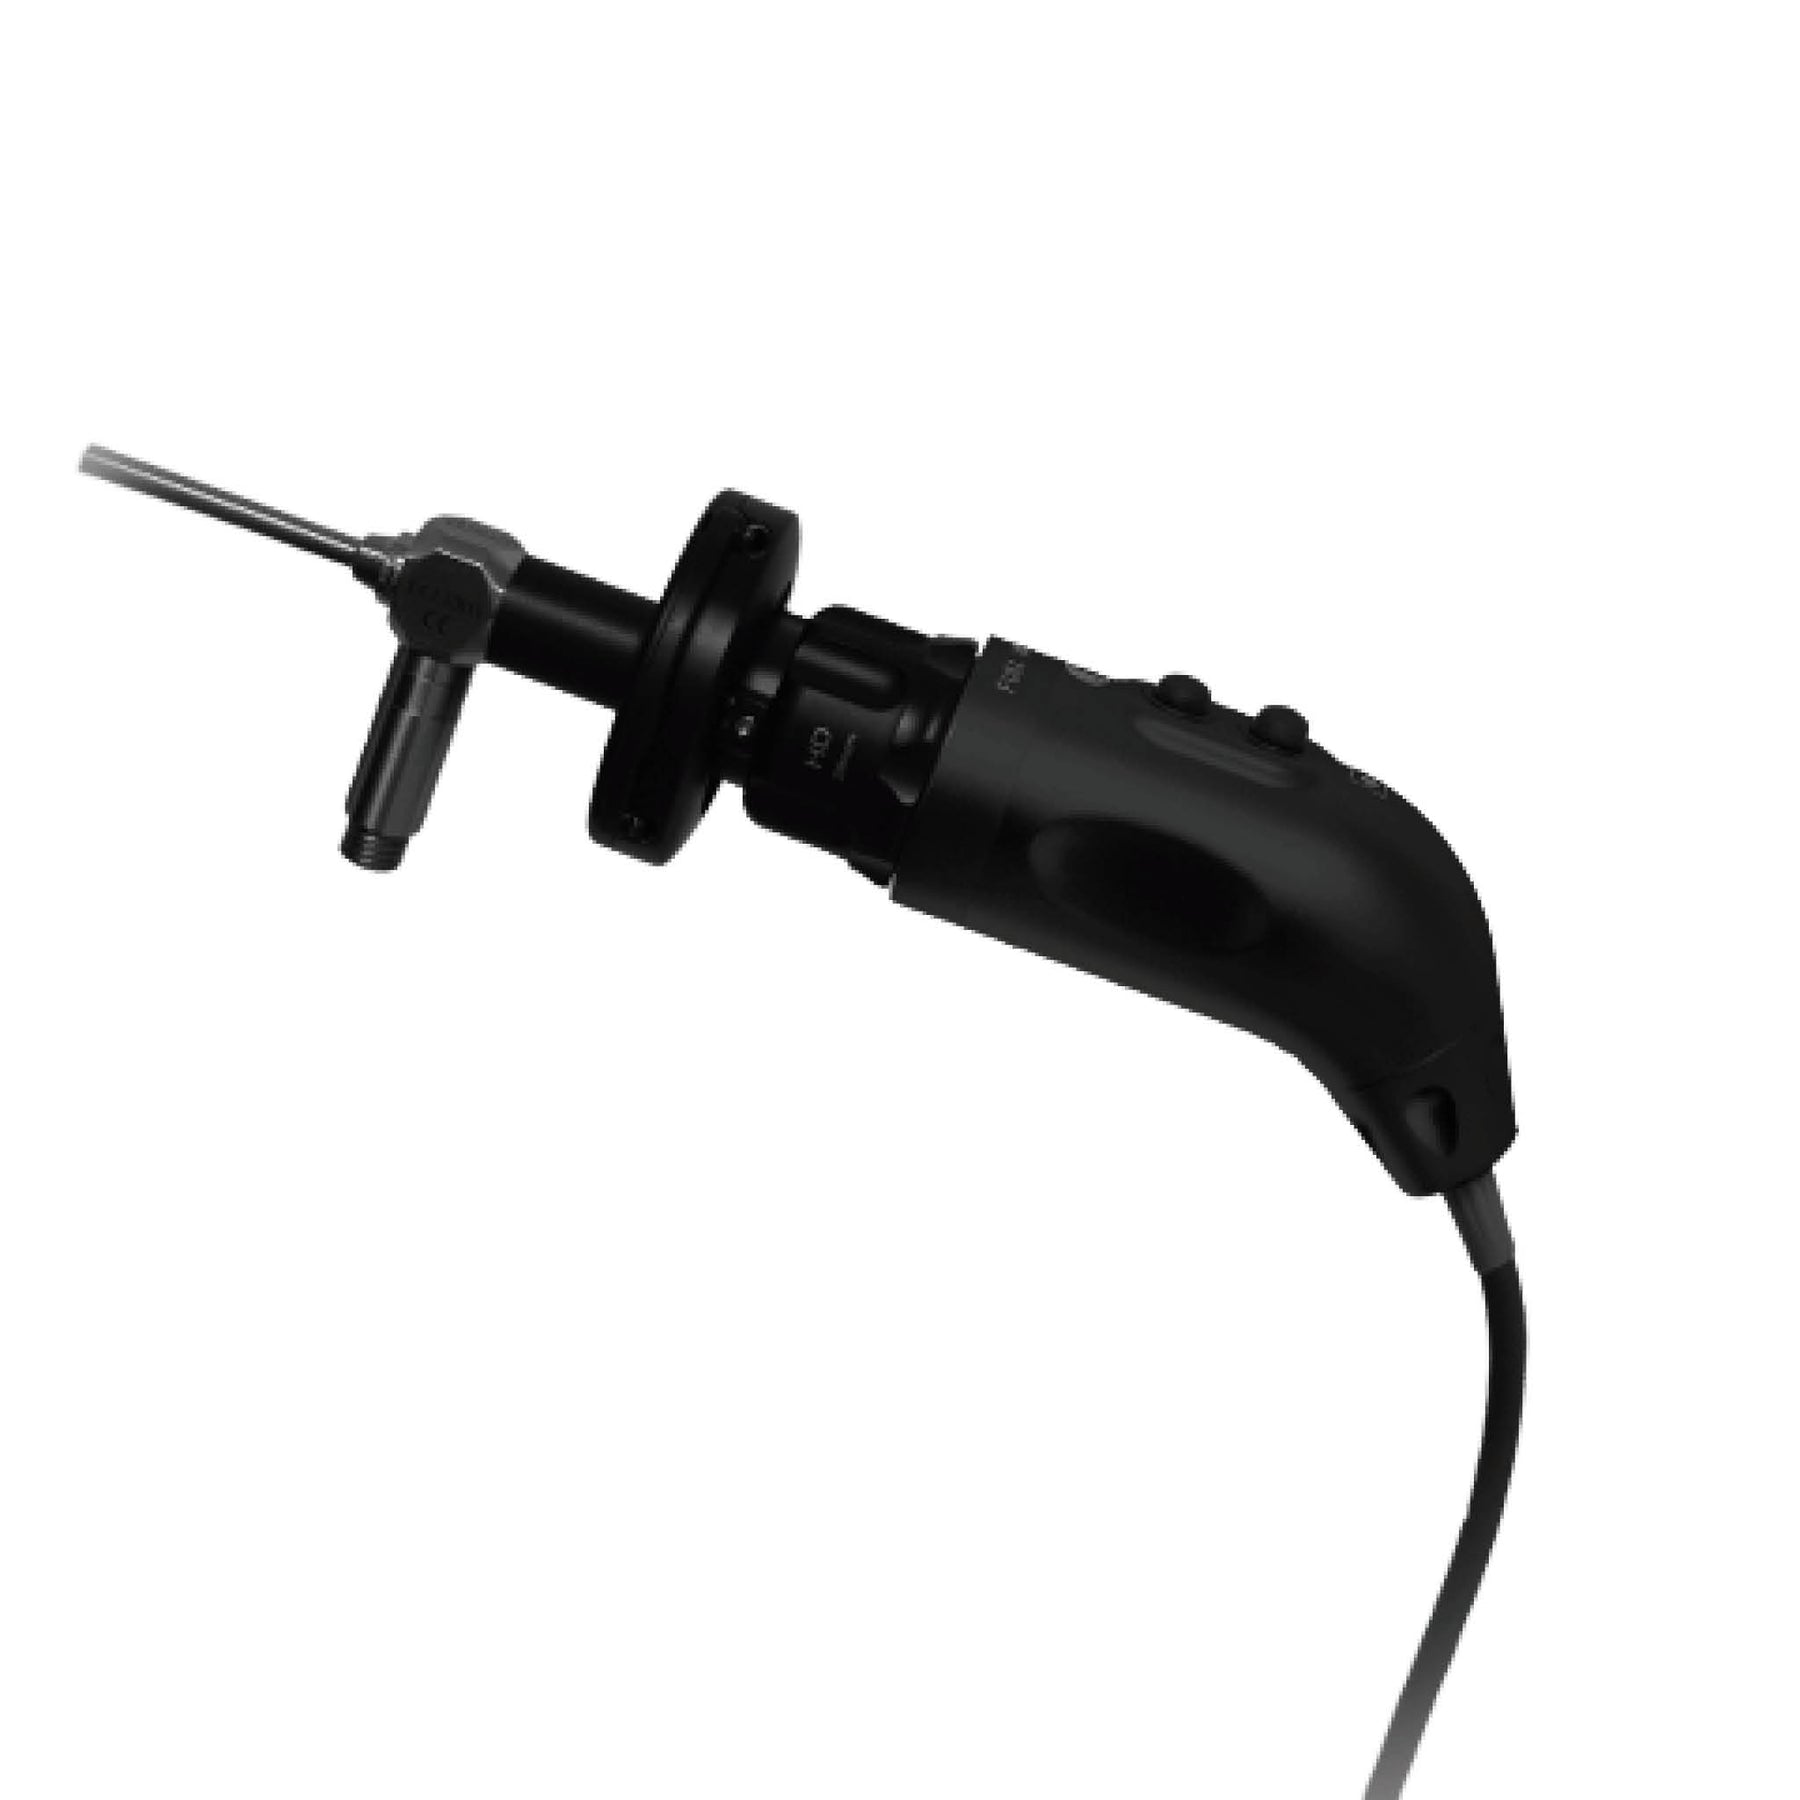 The Ecleris Procam High Definition medical camera produces exceptional endoscopic images in High Definition quality.